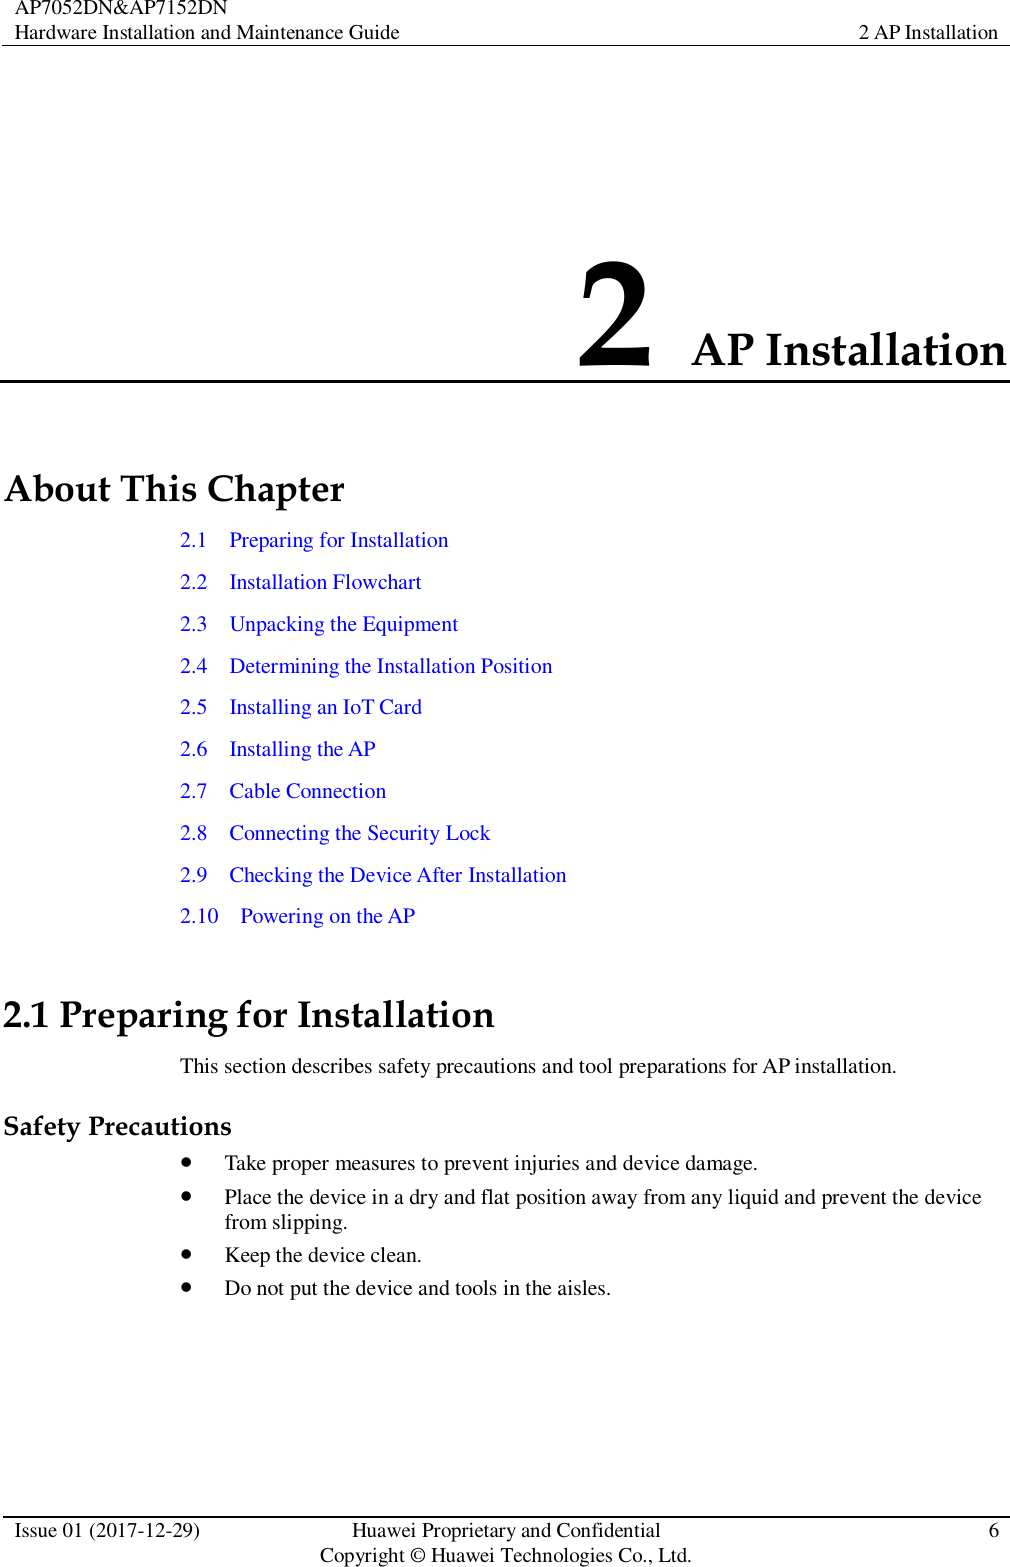 AP7052DN&amp;AP7152DN Hardware Installation and Maintenance Guide 2 AP Installation  Issue 01 (2017-12-29) Huawei Proprietary and Confidential                                     Copyright © Huawei Technologies Co., Ltd. 6  2 AP Installation About This Chapter 2.1    Preparing for Installation 2.2    Installation Flowchart 2.3    Unpacking the Equipment 2.4    Determining the Installation Position 2.5    Installing an IoT Card 2.6    Installing the AP 2.7    Cable Connection 2.8    Connecting the Security Lock 2.9    Checking the Device After Installation 2.10    Powering on the AP 2.1 Preparing for Installation This section describes safety precautions and tool preparations for AP installation. Safety Precautions  Take proper measures to prevent injuries and device damage.    Place the device in a dry and flat position away from any liquid and prevent the device from slipping.  Keep the device clean.  Do not put the device and tools in the aisles.  